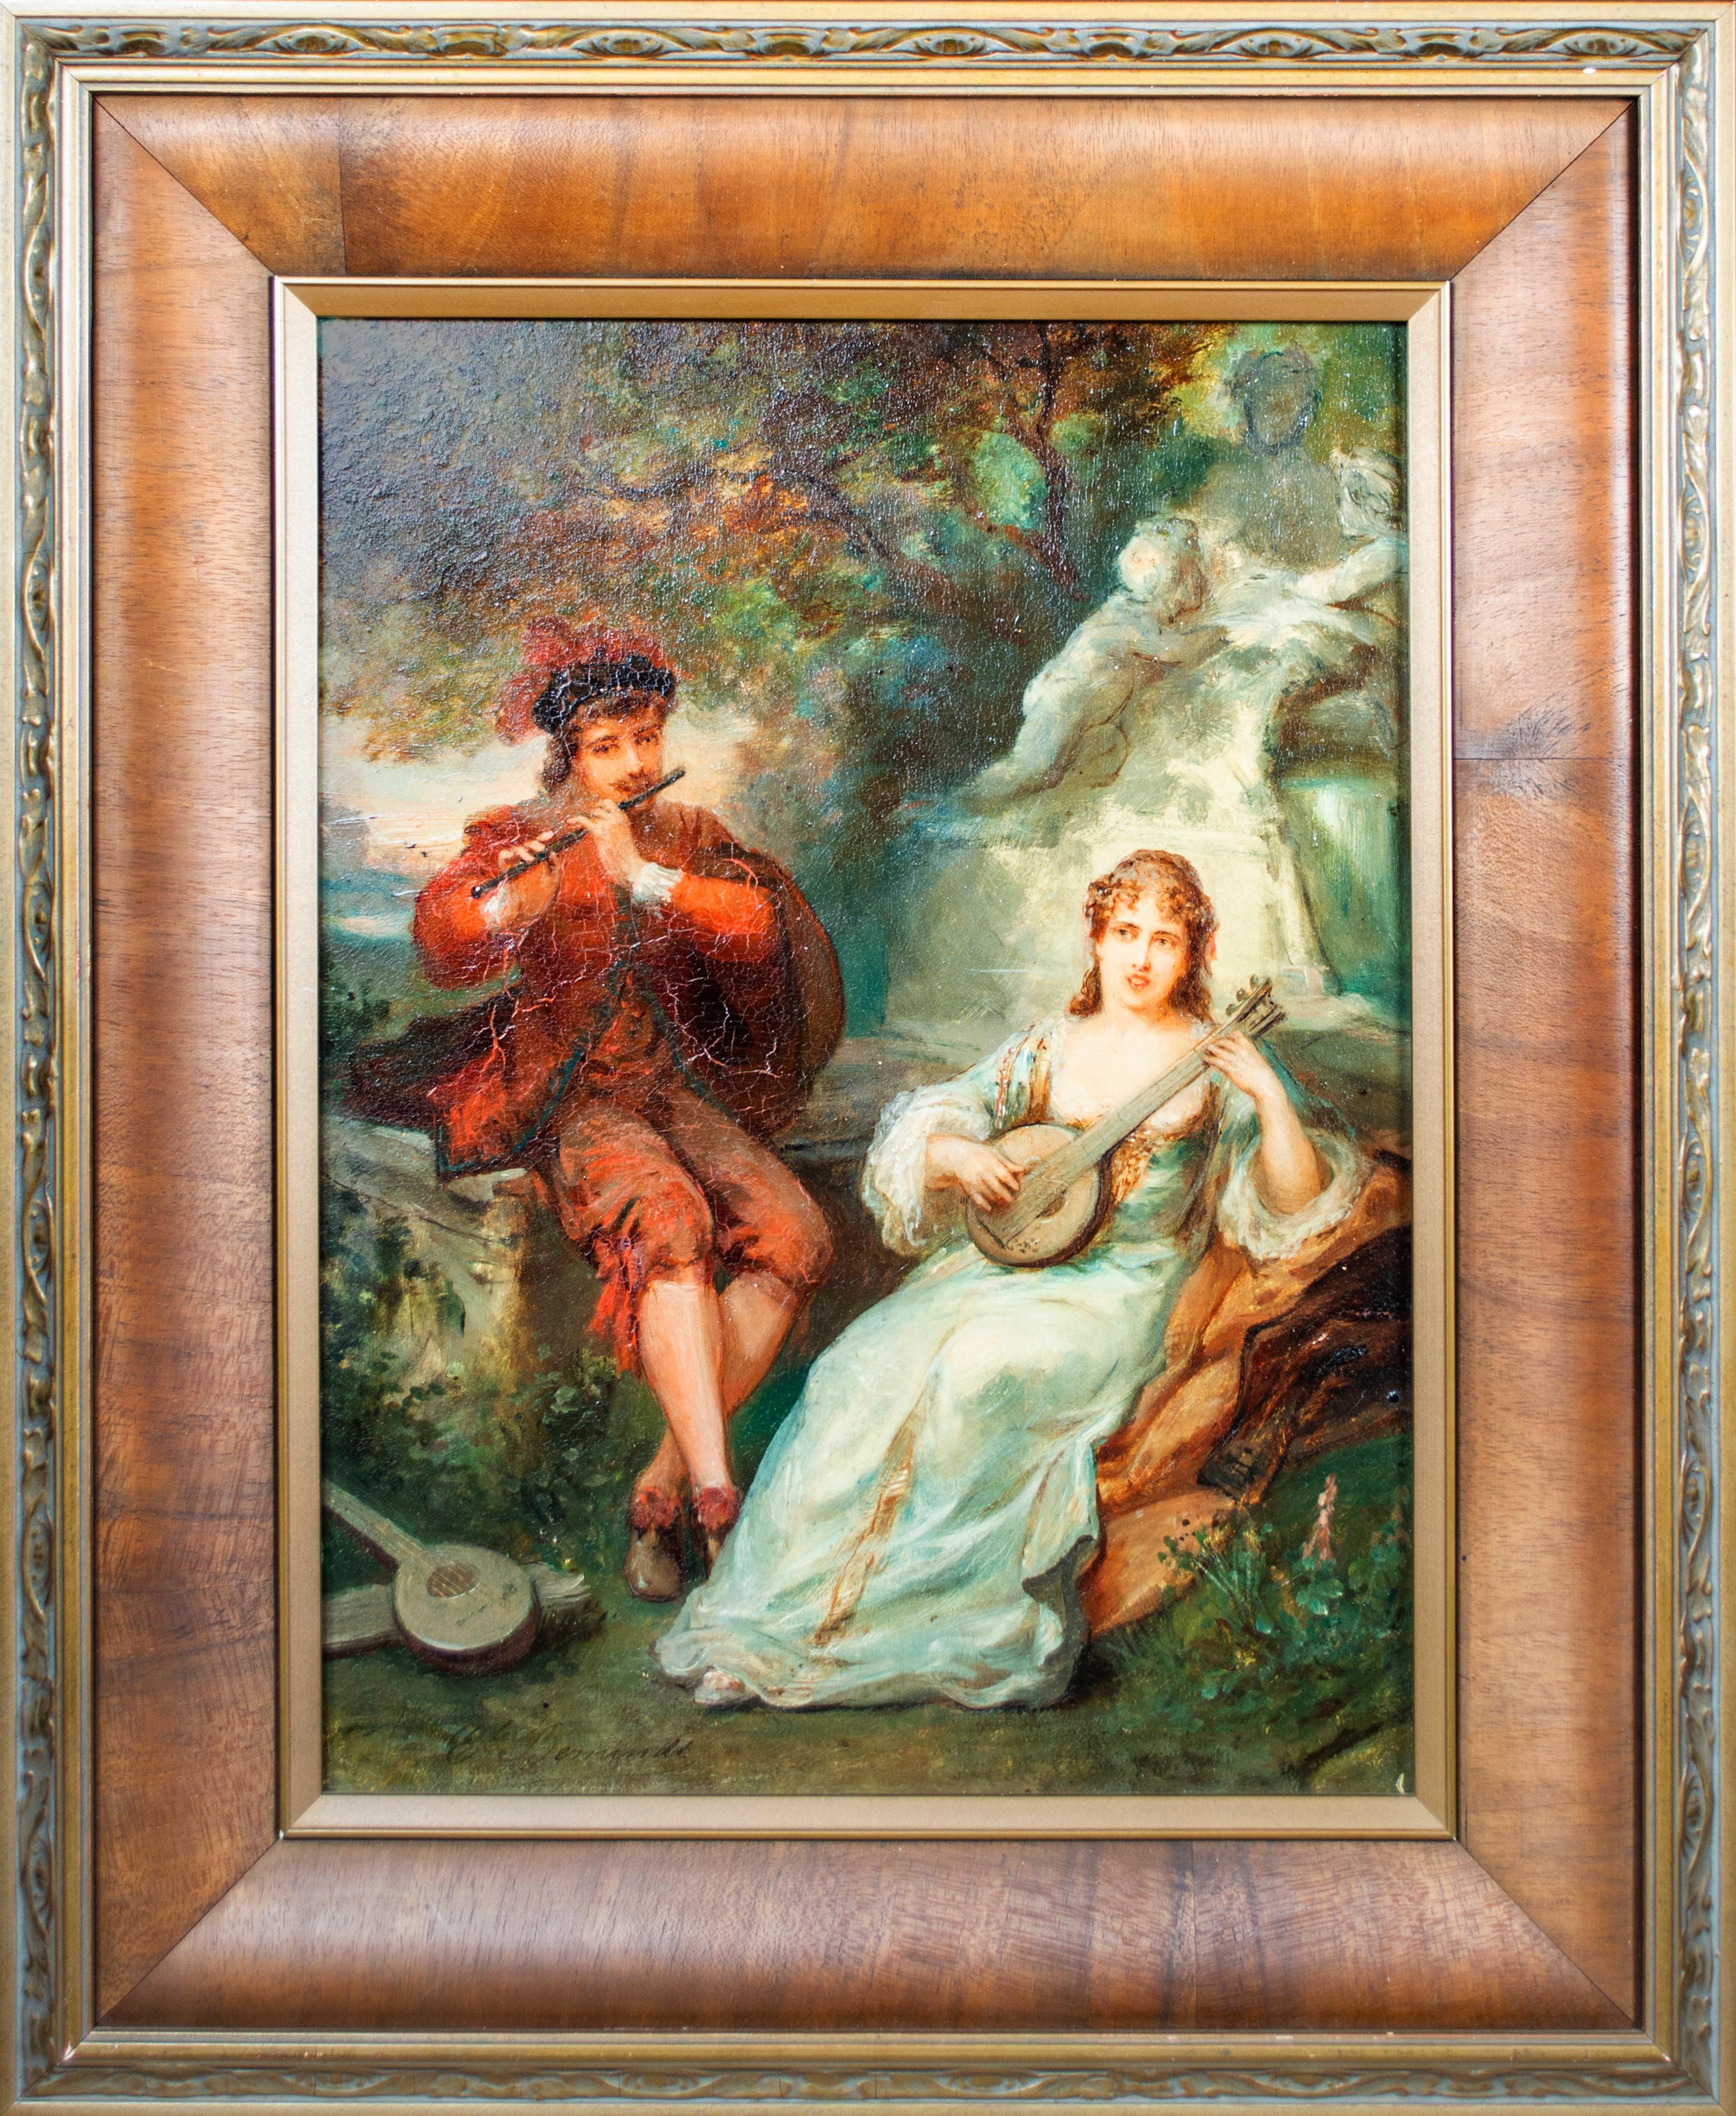 'Two Musicians' original signed oil on mahogany painting, garden 19th century